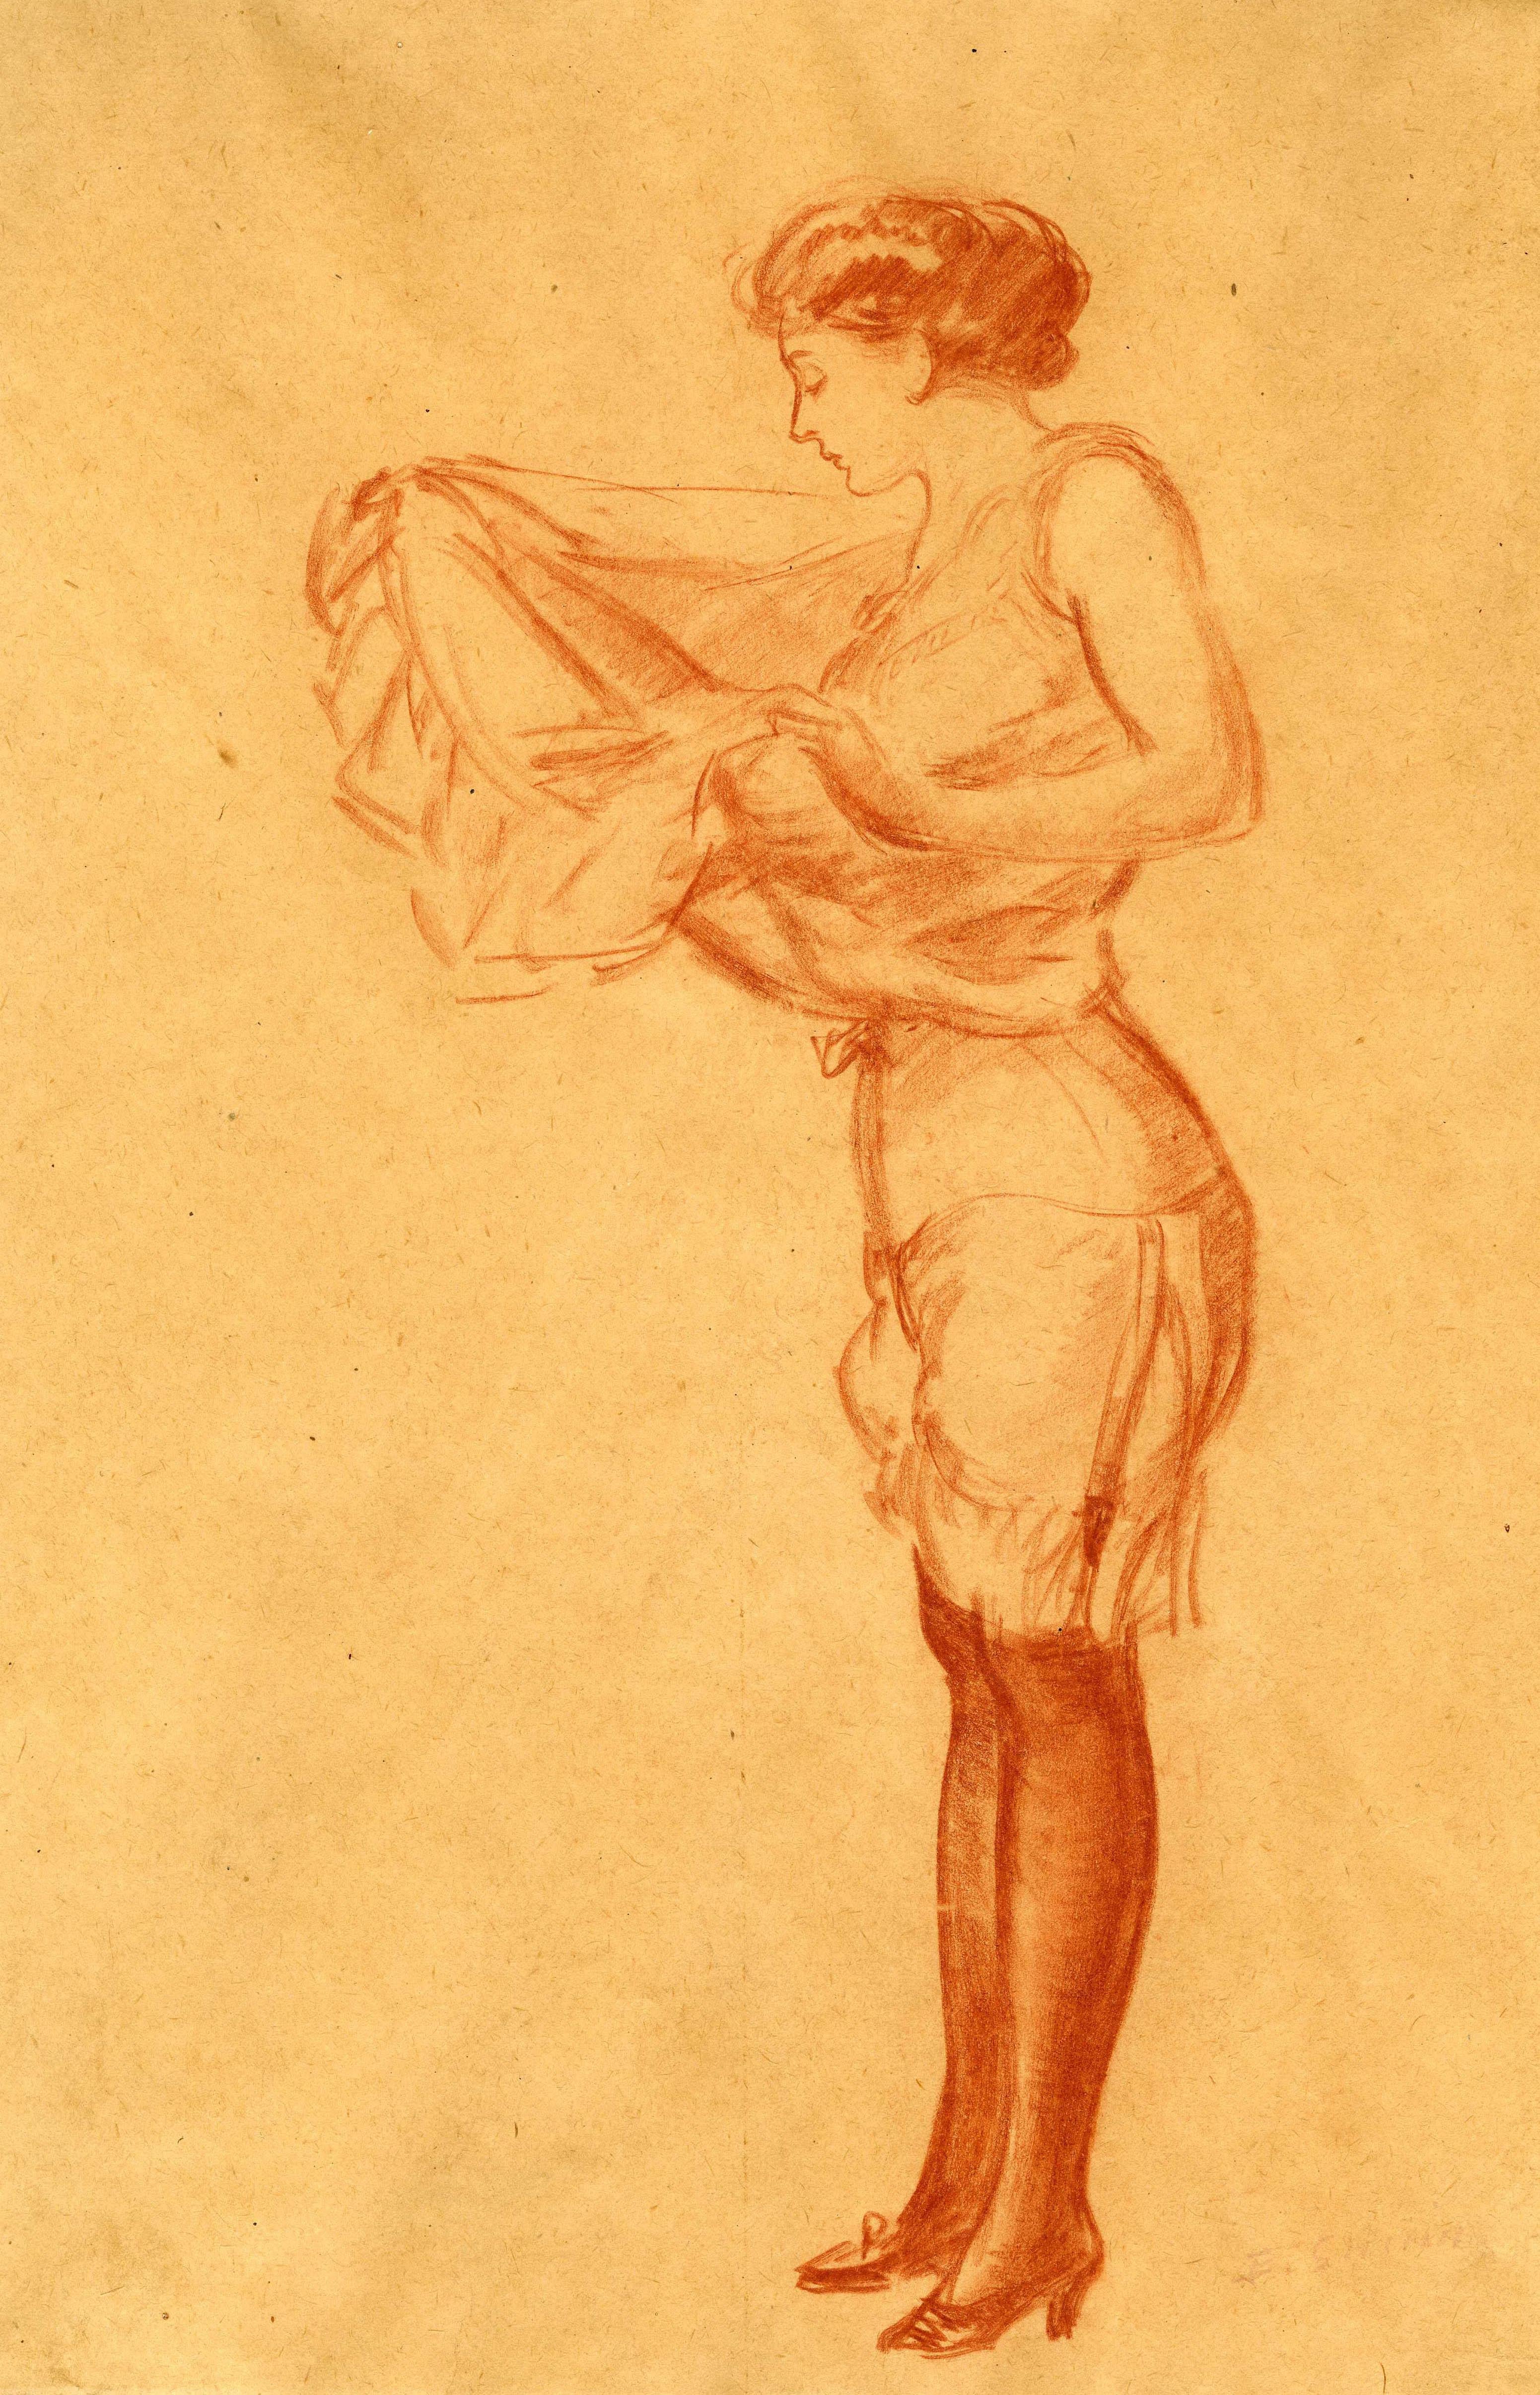 Woman Pulling on a Slip
Conte on paper, c. 1910
Signed lower right: 